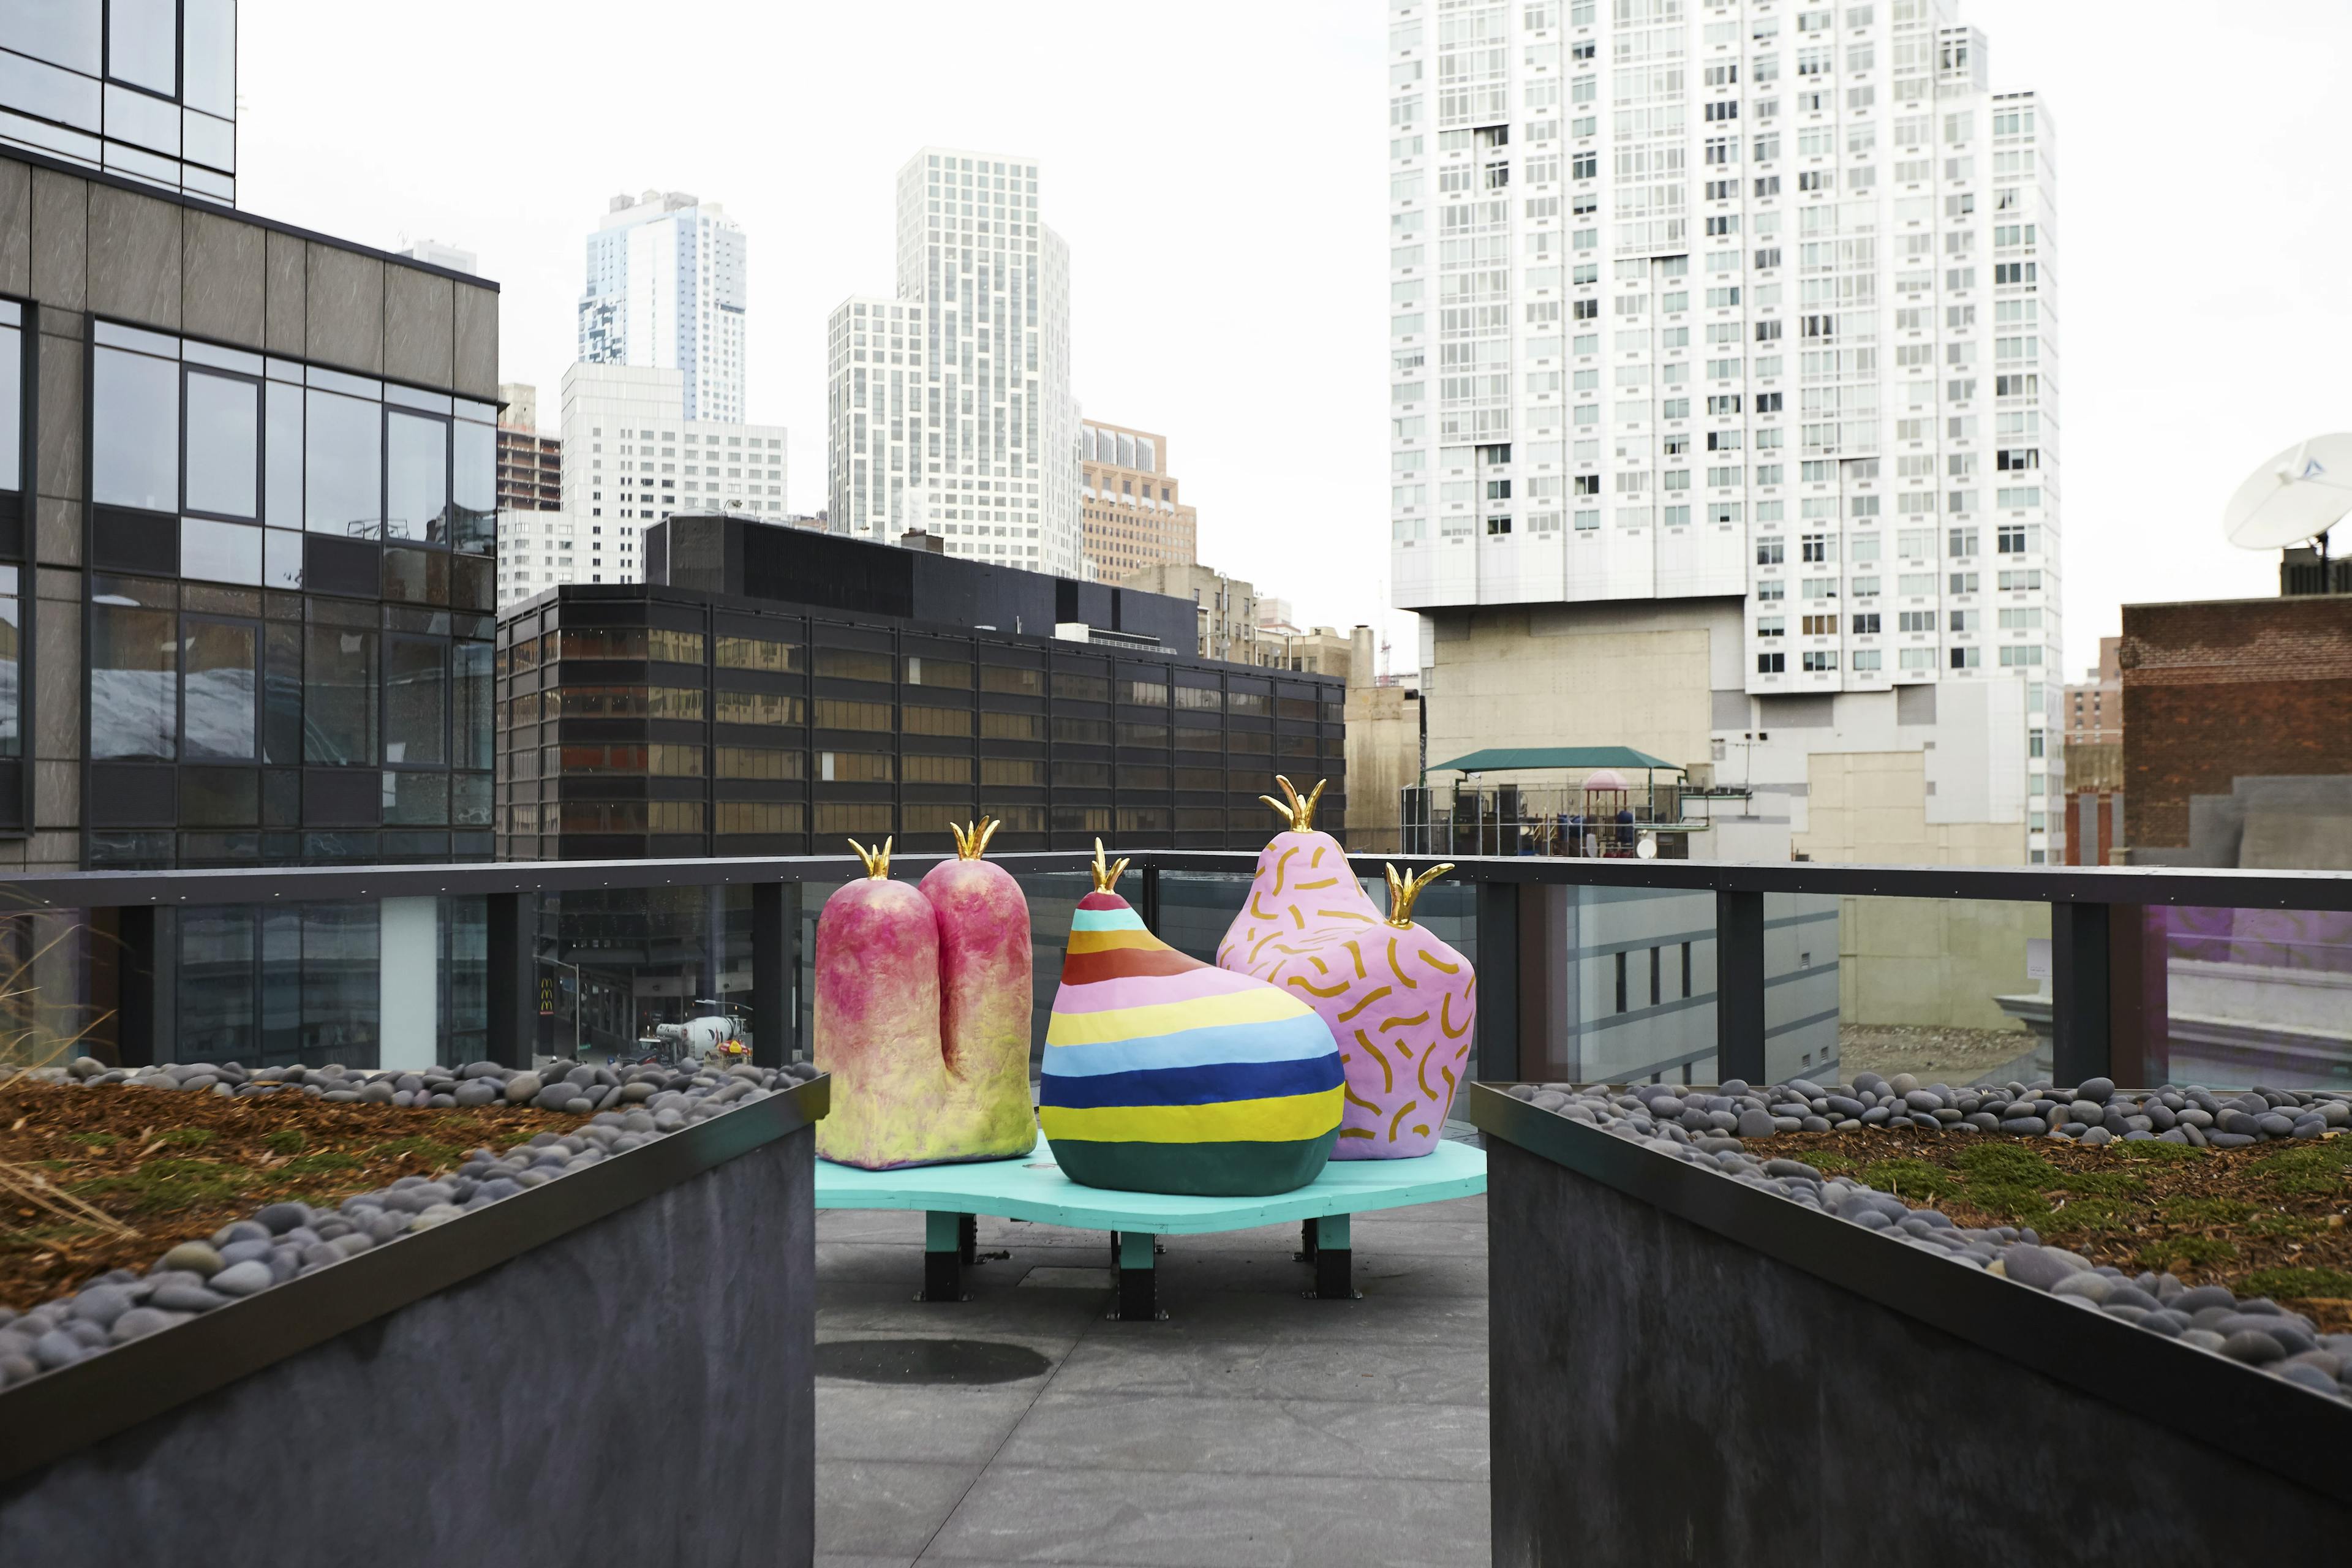 Colorful, large-scale sculptures by artist duo CHIAOZZA affixed to a blue platform on a building balcony in the middle of a cityscape with skyscrapers.